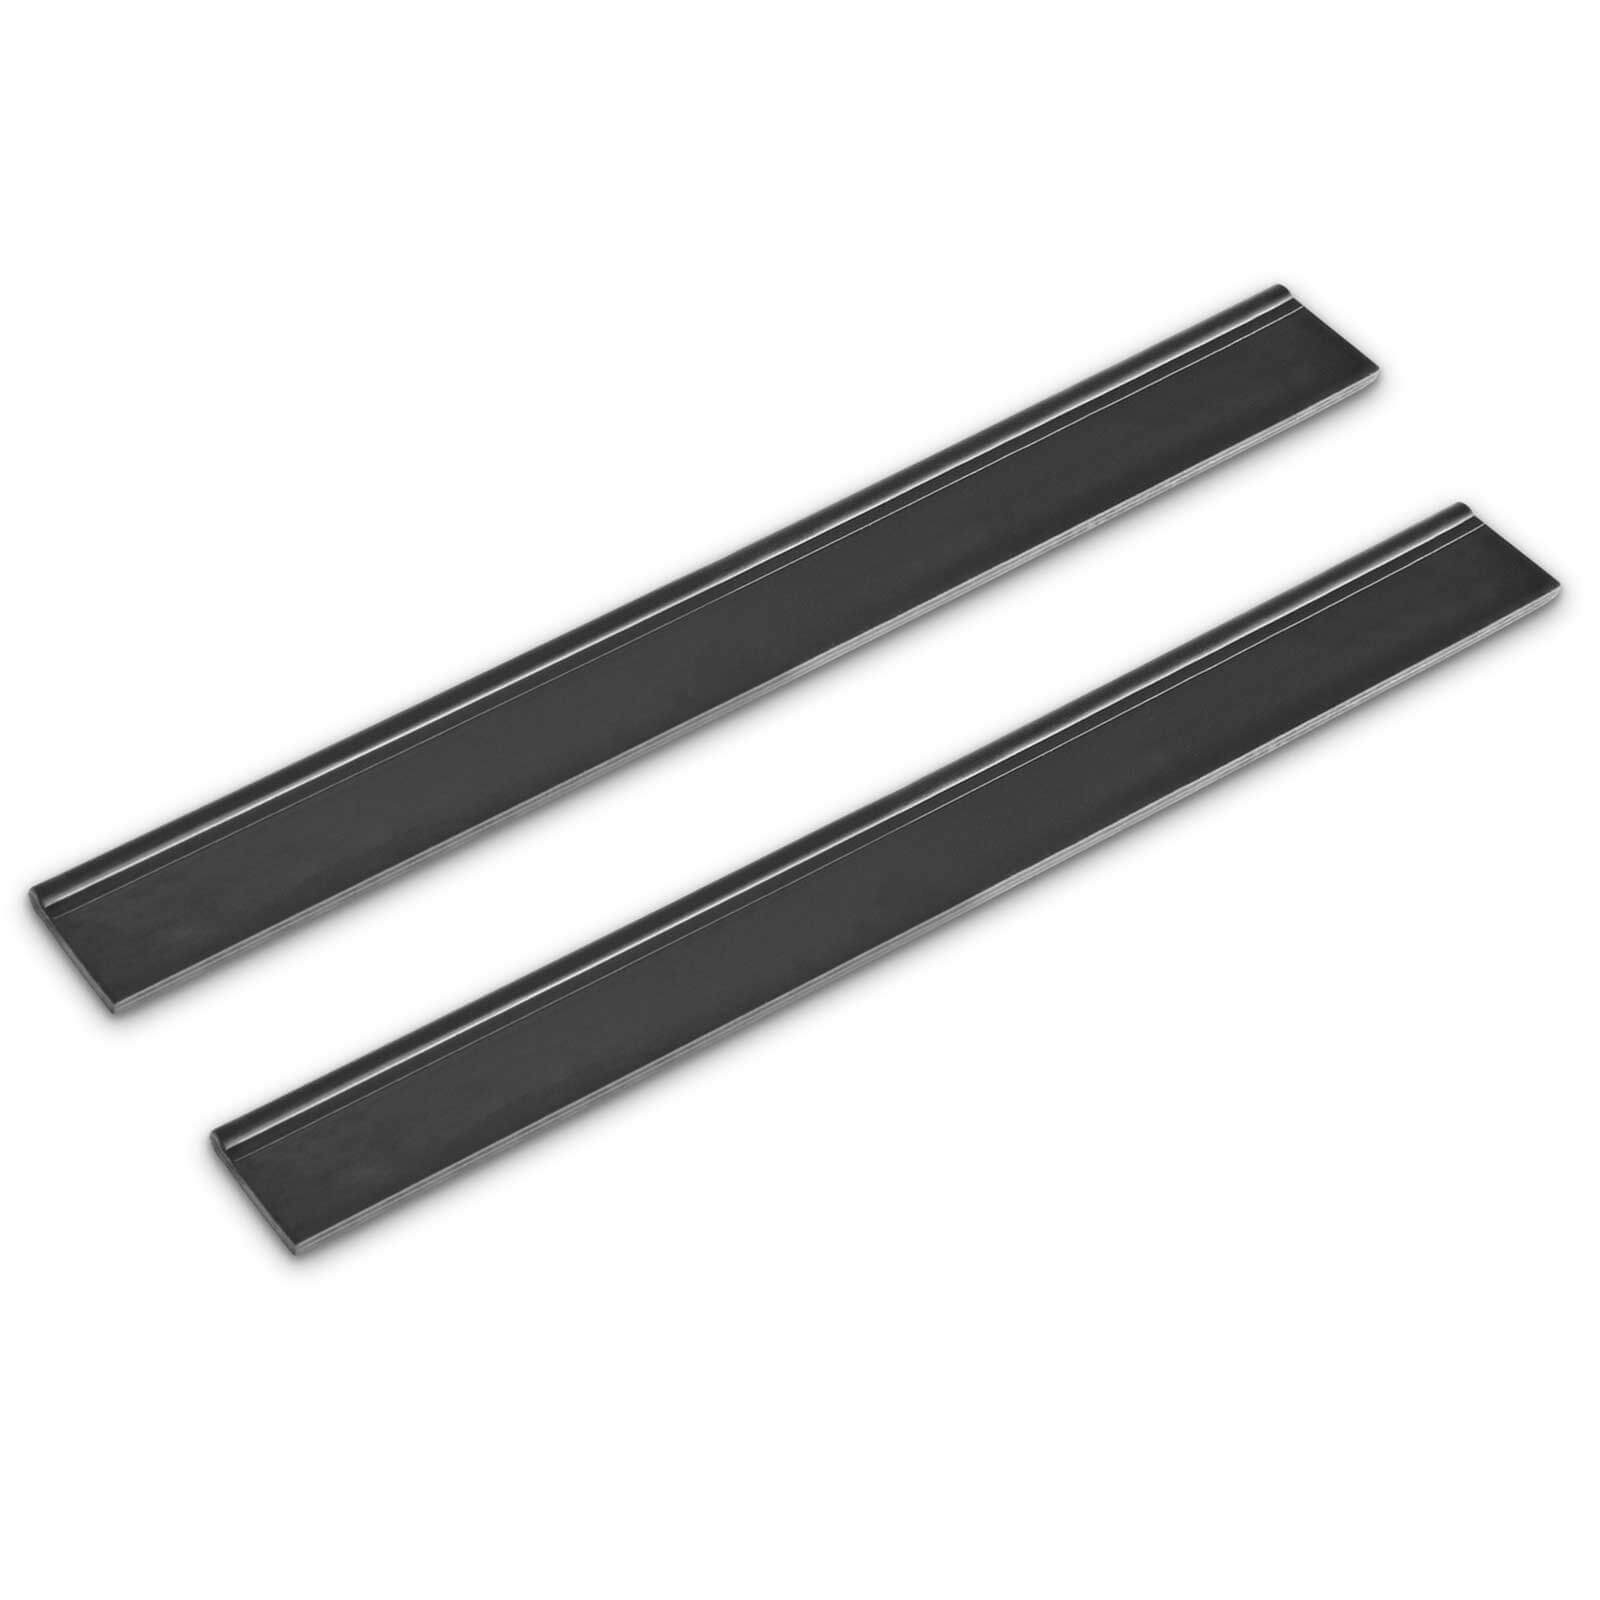 Image of Karcher Suction Lips 170mm for WV 2 - 5 Window Vacs Pack of 2